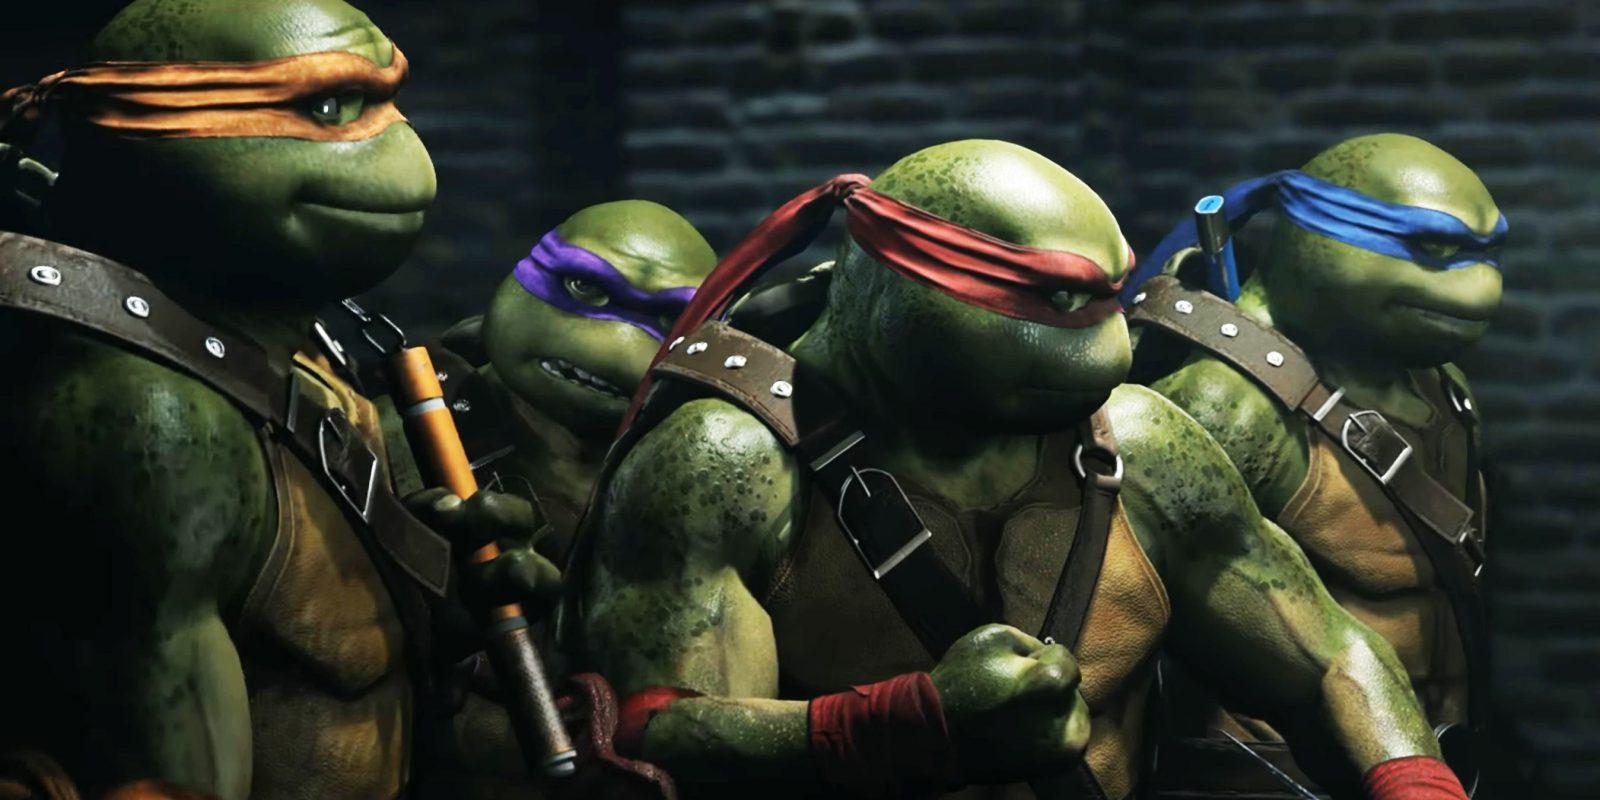 Just in case you didn't understand the crimefighting turtle reference. Image from Forbes